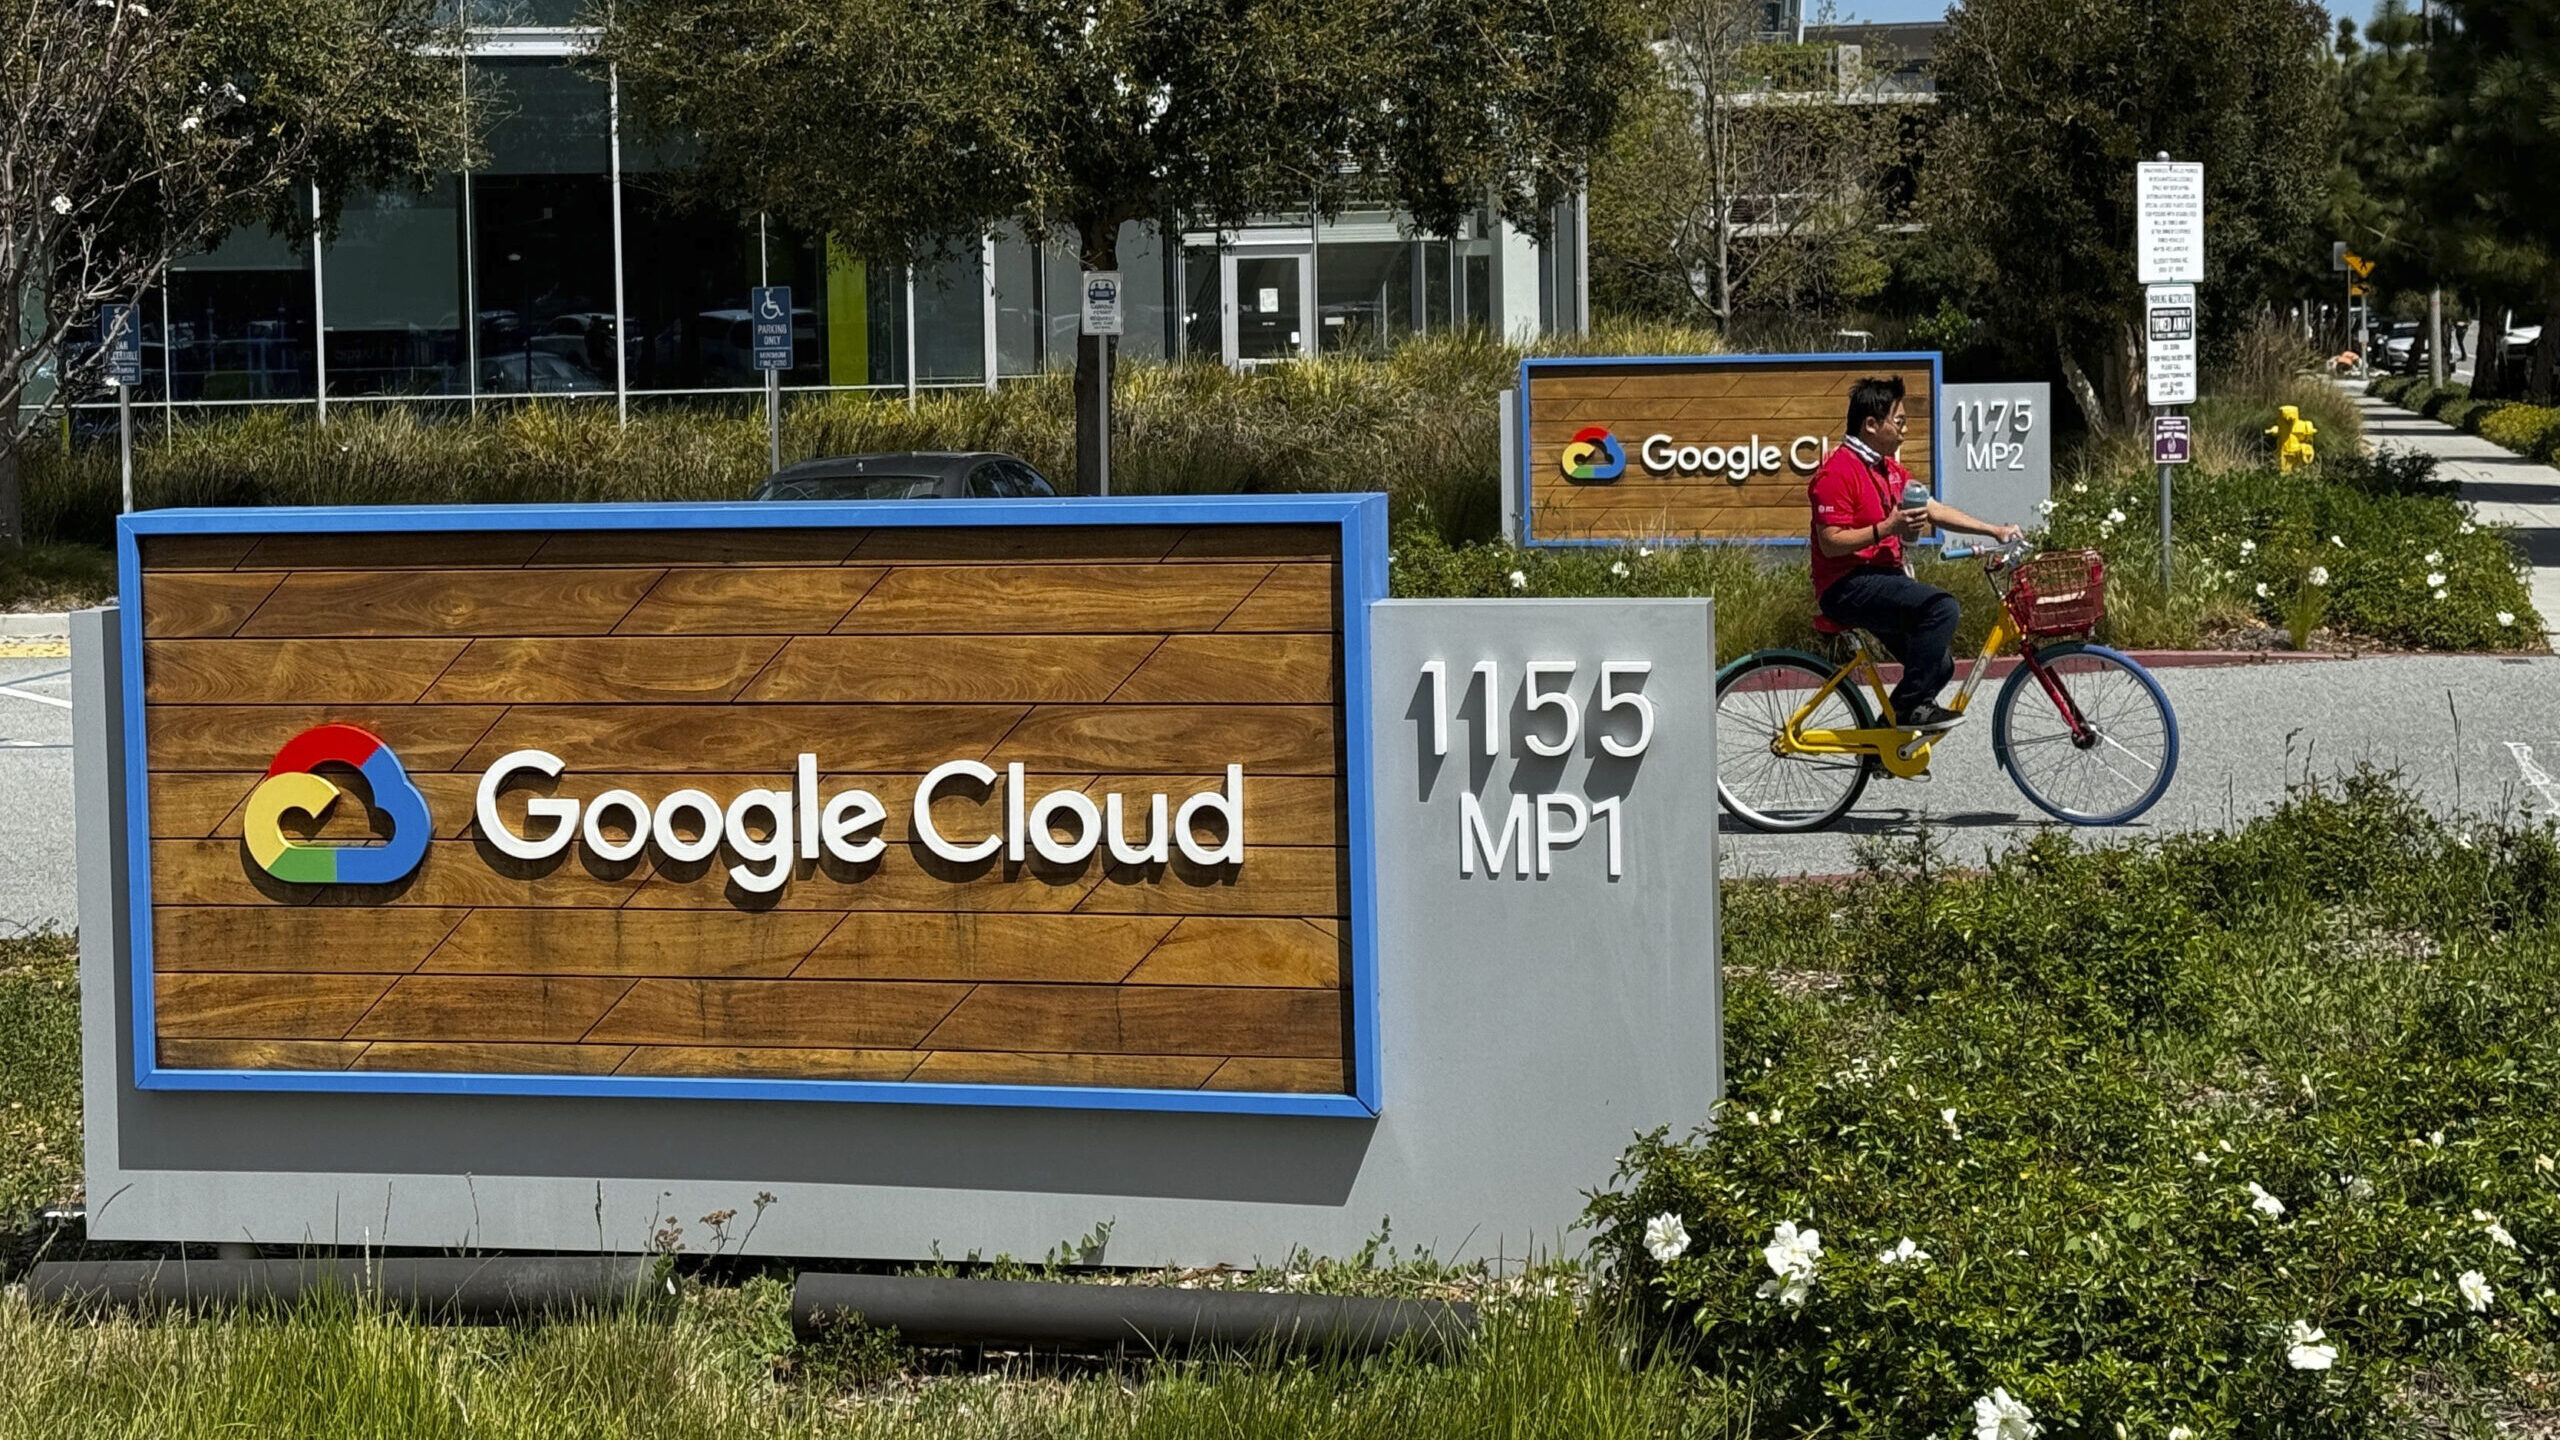 A wood sign with the Google Cloud logo on a sunny day. A person rides their bike behind it....